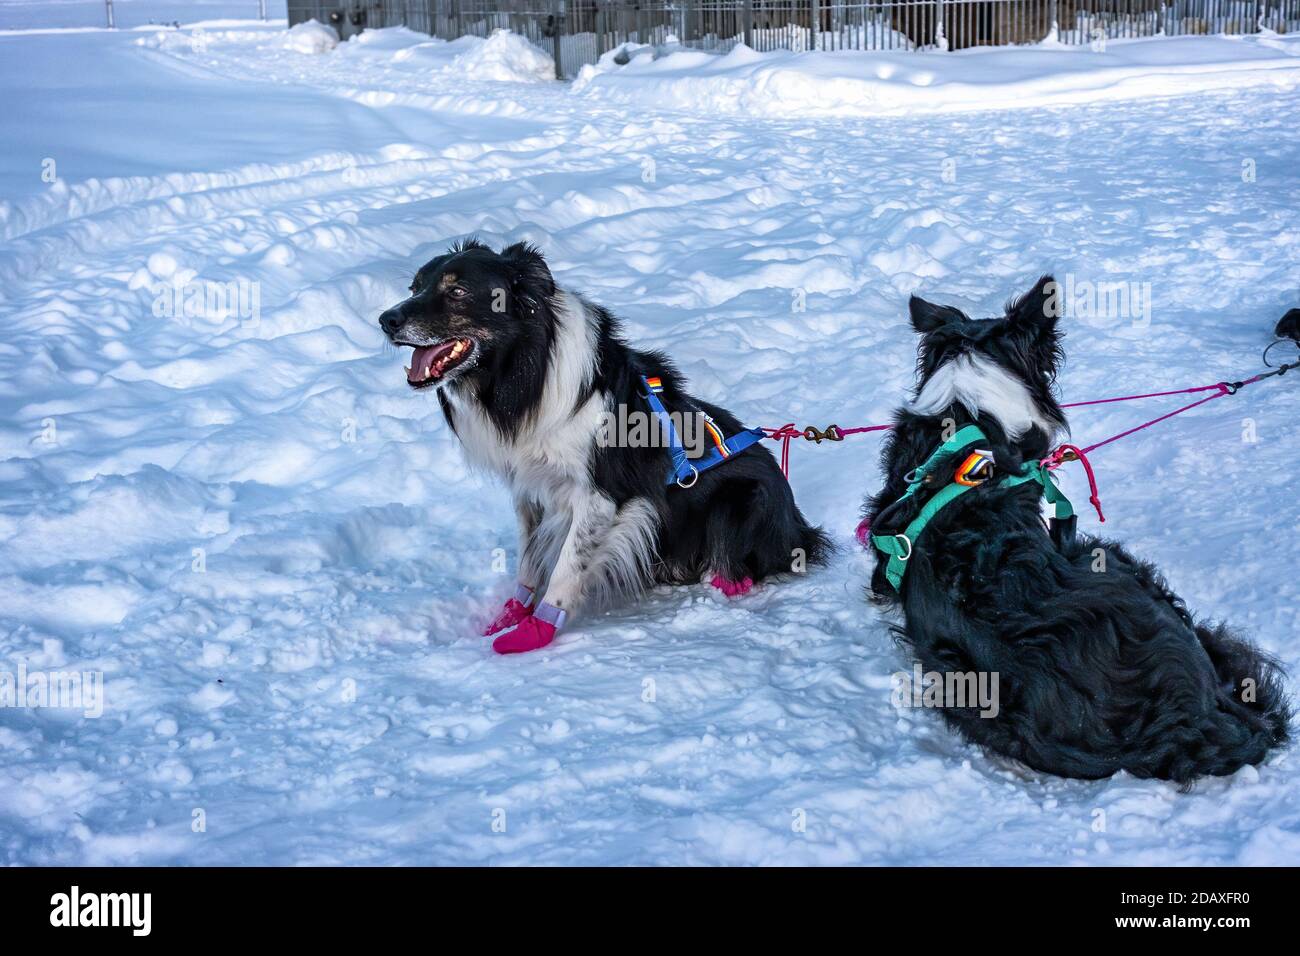 Two Mackenzie River Husky dogs lay on snow before riding sled in snowy winter Lapland landscape, Sweden. Side view Stock Photo